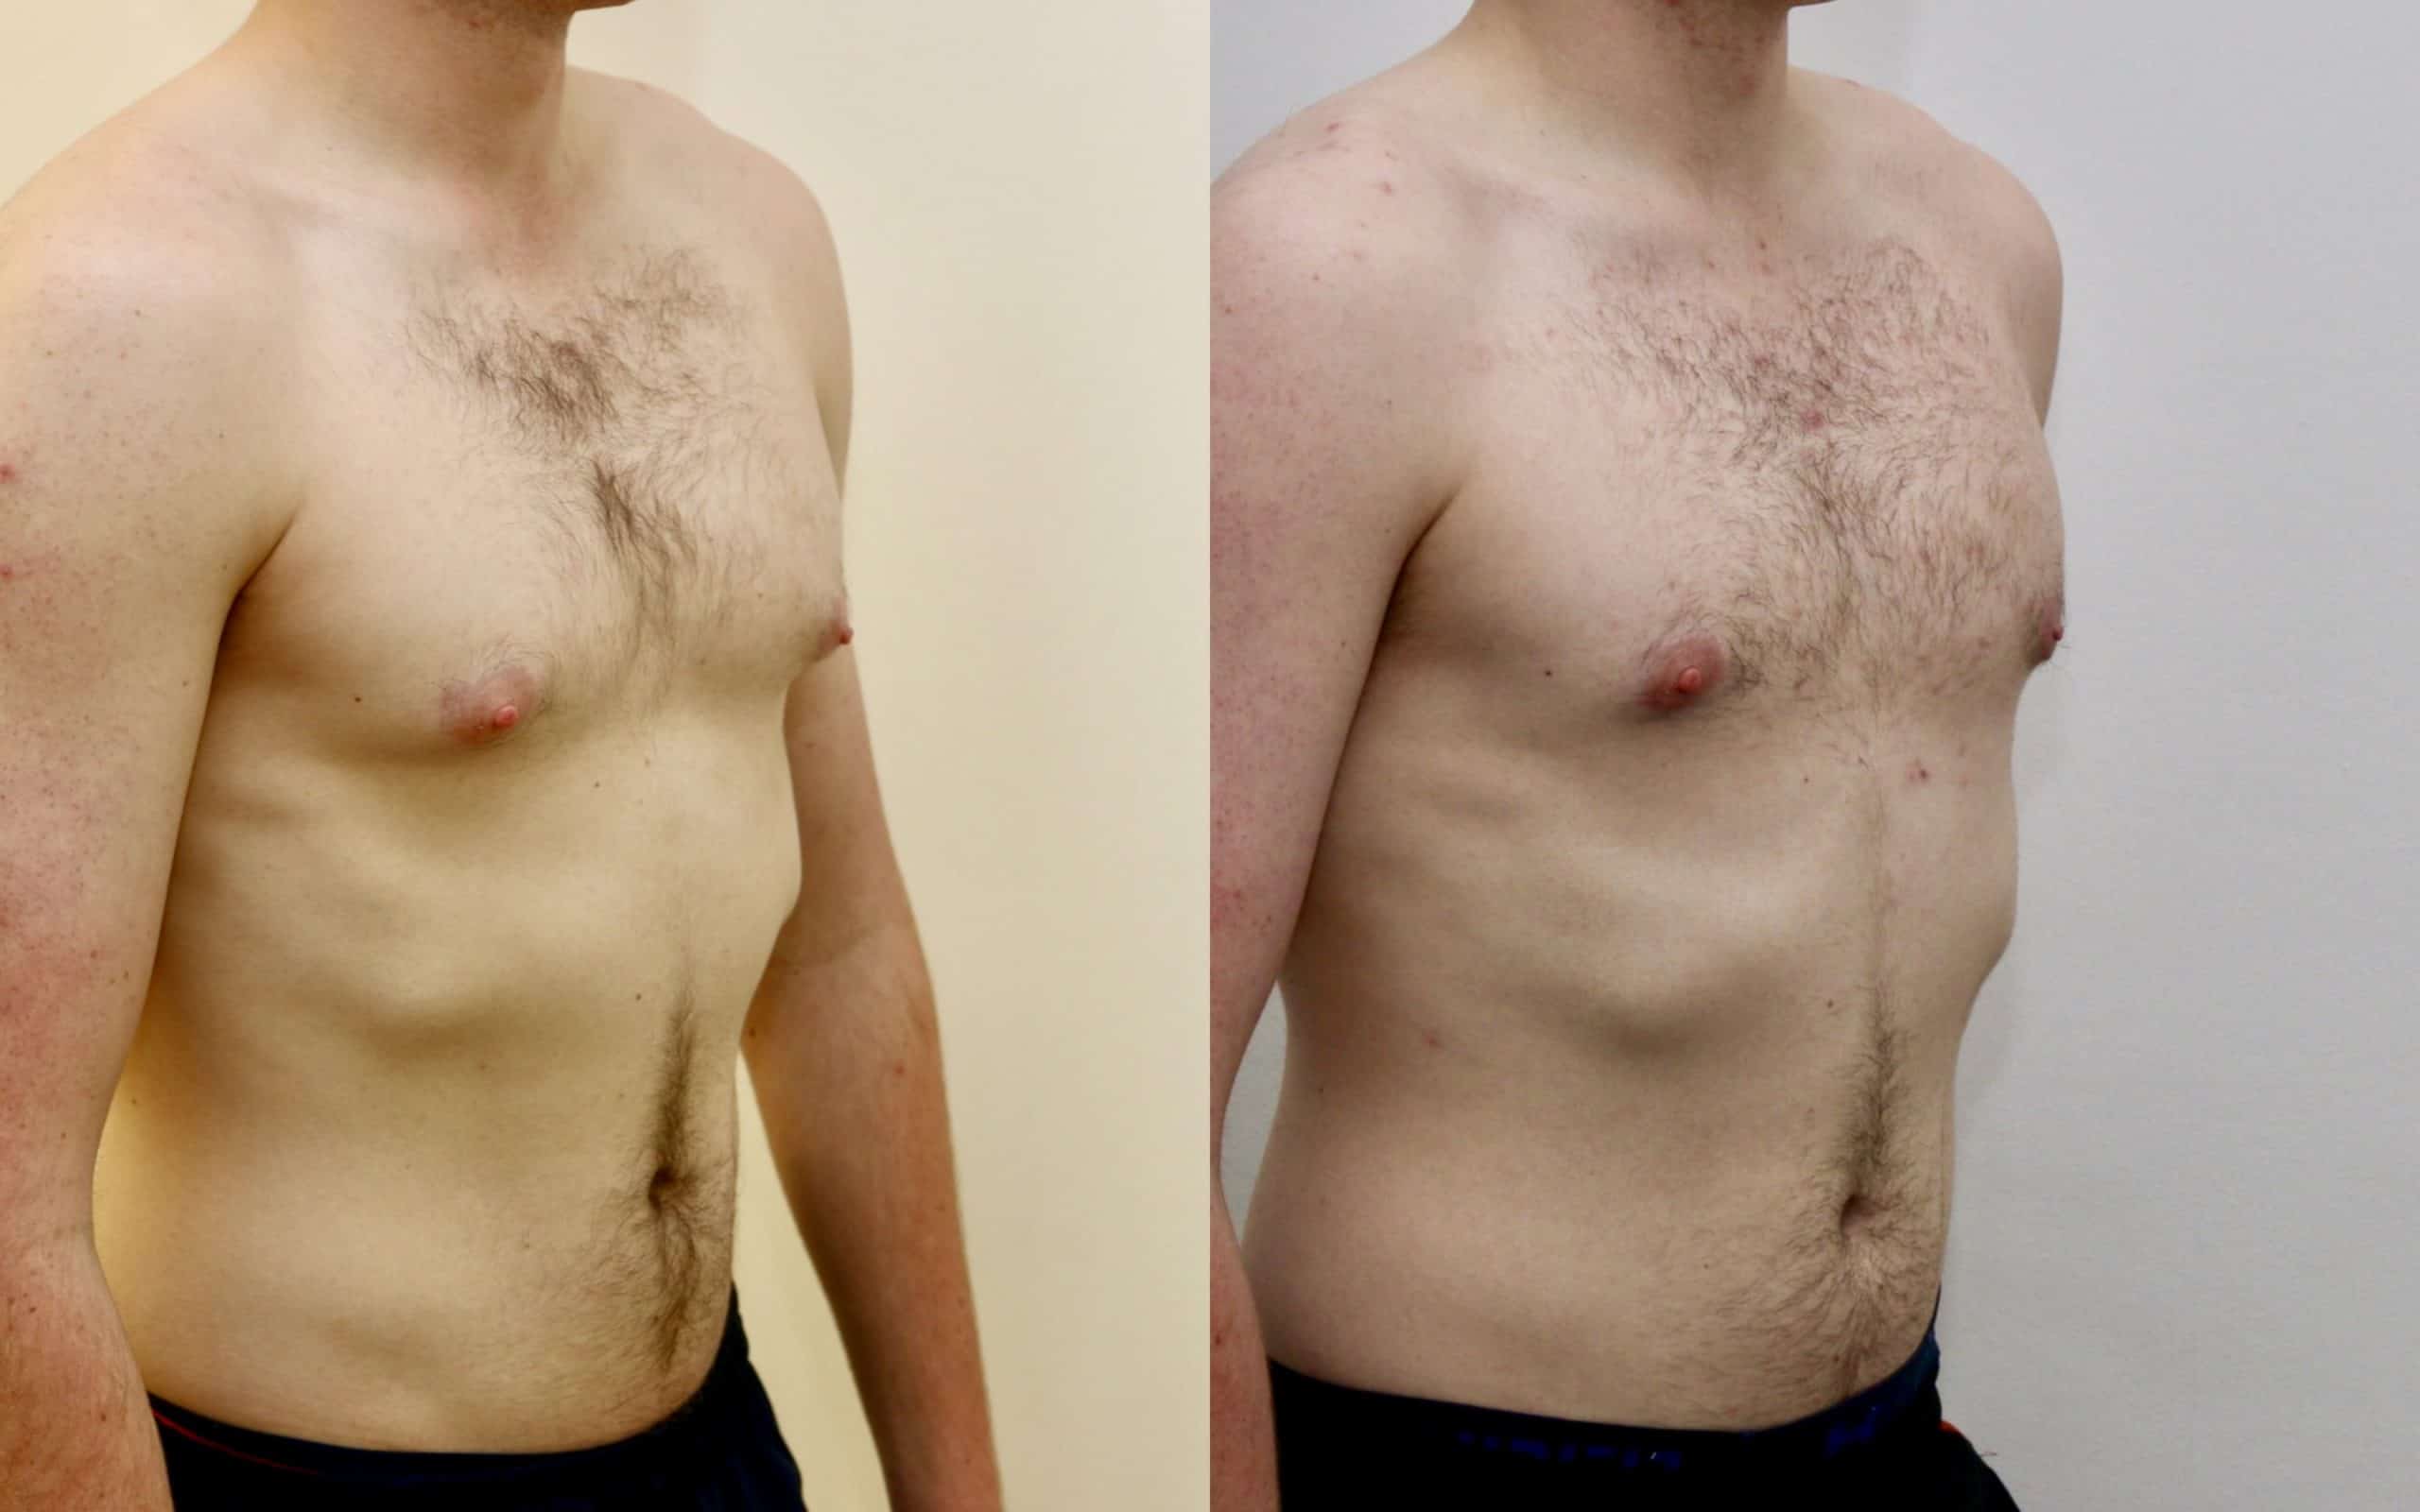 Gynecomastia liposuction and gland excision before and after